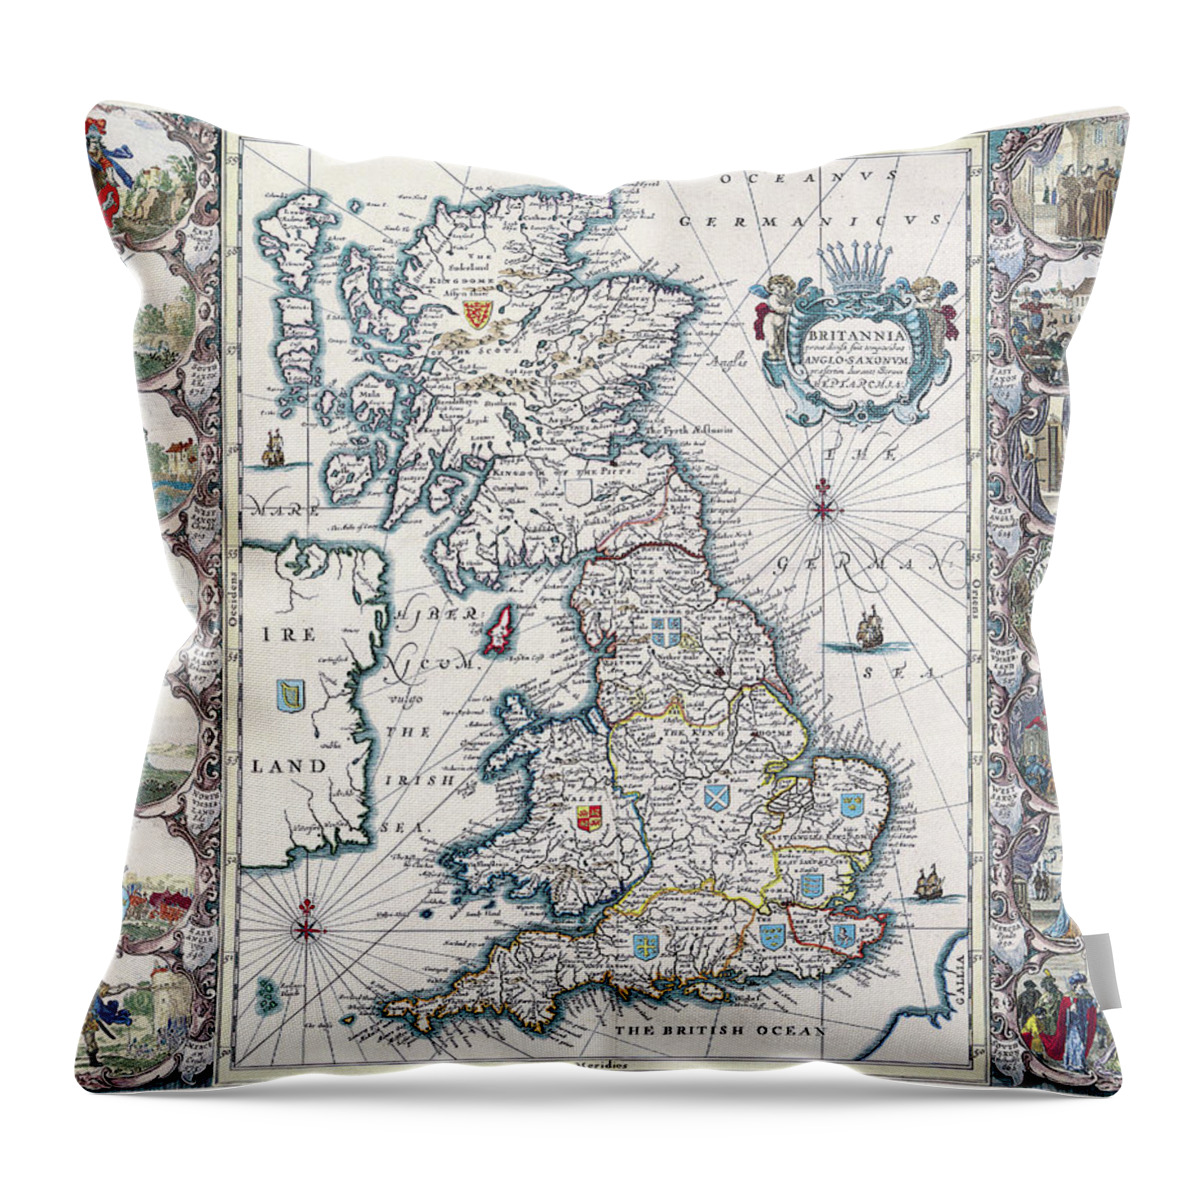 Antique Map Of British Isles Throw Pillow featuring the drawing Antique Maps - Old Cartographic maps - Antique Anglo Saxon Map of The British Isles, 1676 by Studio Grafiikka